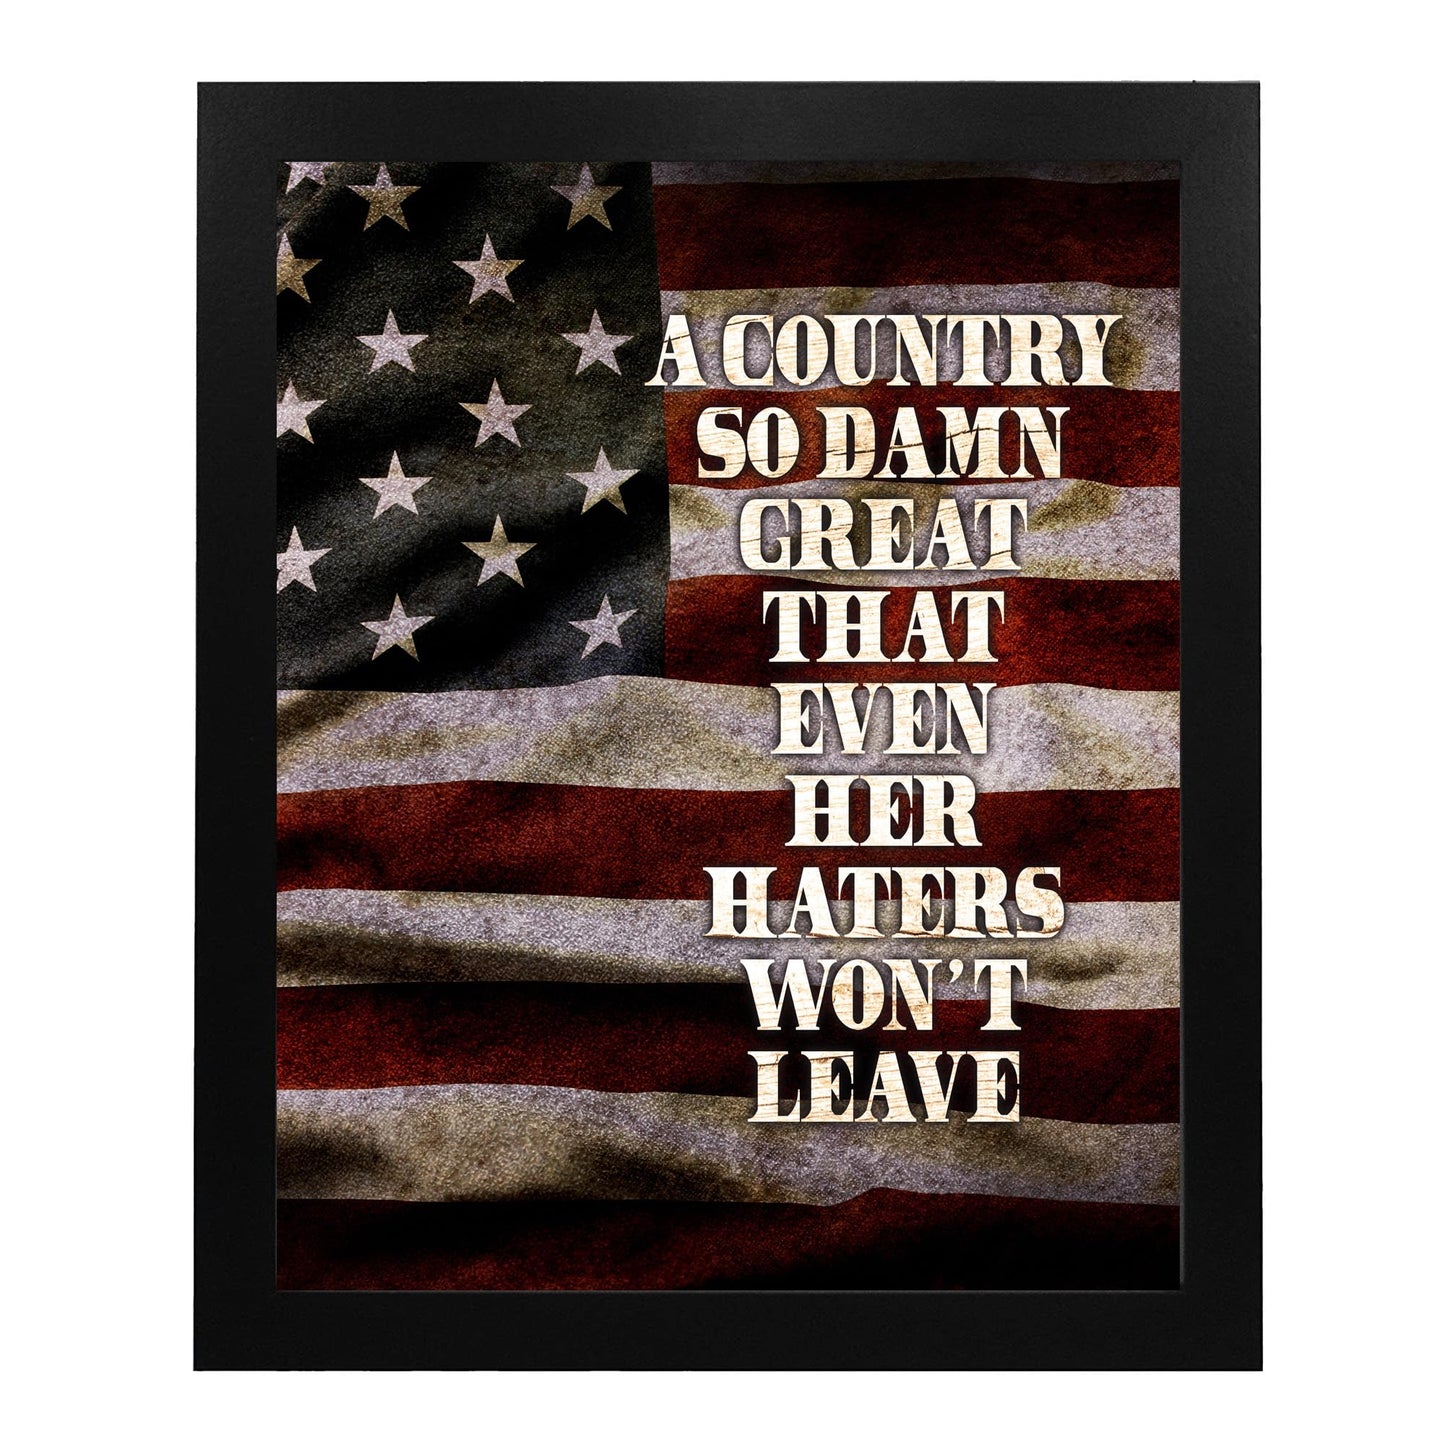 Country S Great Even Haters Won't Leave - Rustic American Flag Wall Art Poster, This Patriotic Wall Art Decor Print Is an Ideal For Home Decor, Offices & Great Gift for Veterans, Unframed - 8x10"